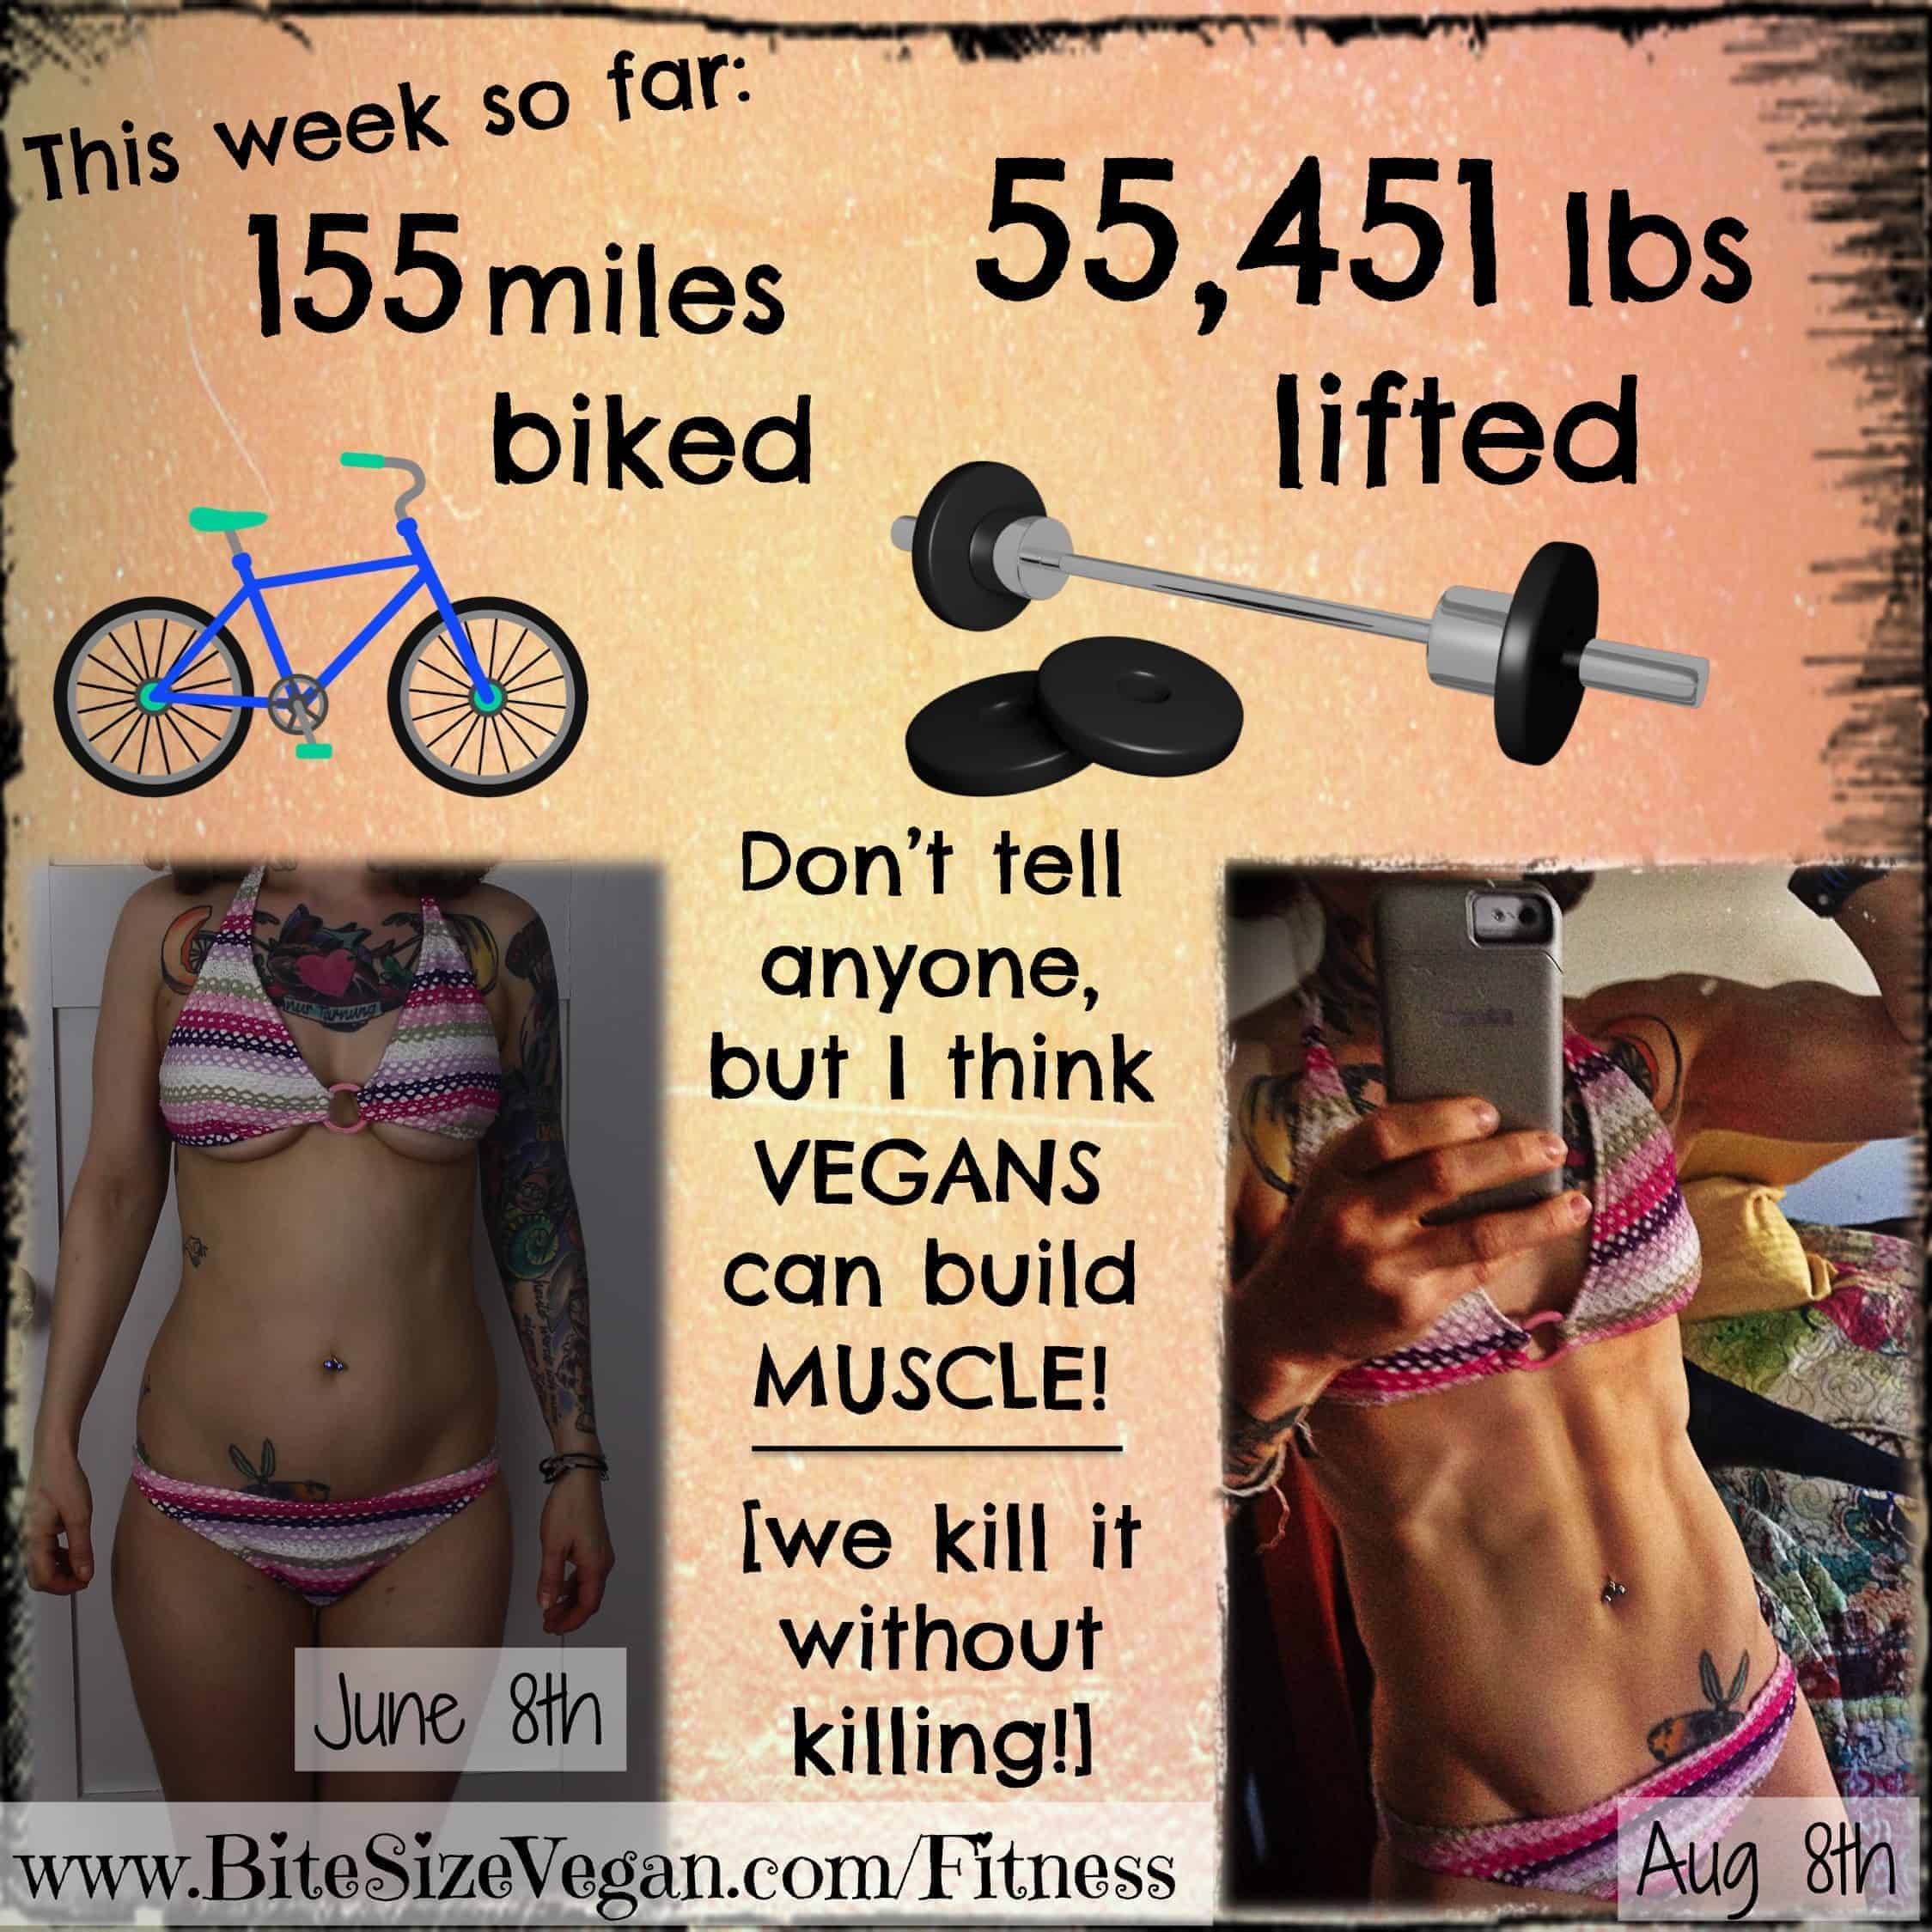 A slide showing the miles cycled and the total weights lifted so far that week by Emily Moran Barwick of Bite Size Vegan In addition, the slide shows two images of Emily along with the text "Don't tell anyone but I think Vegans can build muscle! We kill it without killing!"